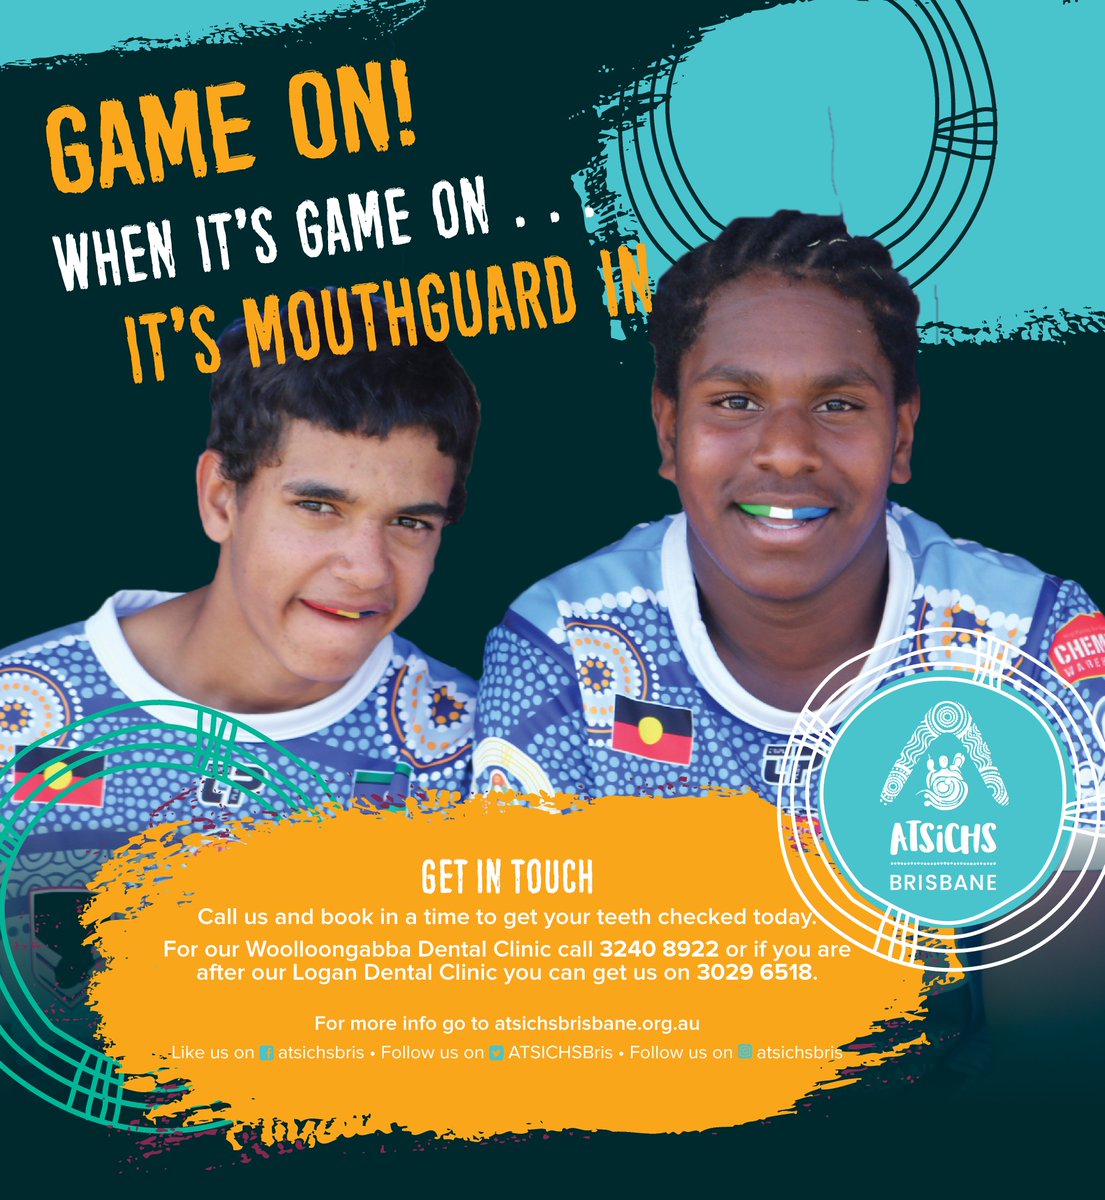 Happy #DentalHealthWeek you mob. It's important to look after your teeth if you play contact sport. Game on, it's mouth guard in! You can get free mouth guards at our two dental clinics. Now that's something to smile about! For more info or to book go to atsichsbrisbane.org.au